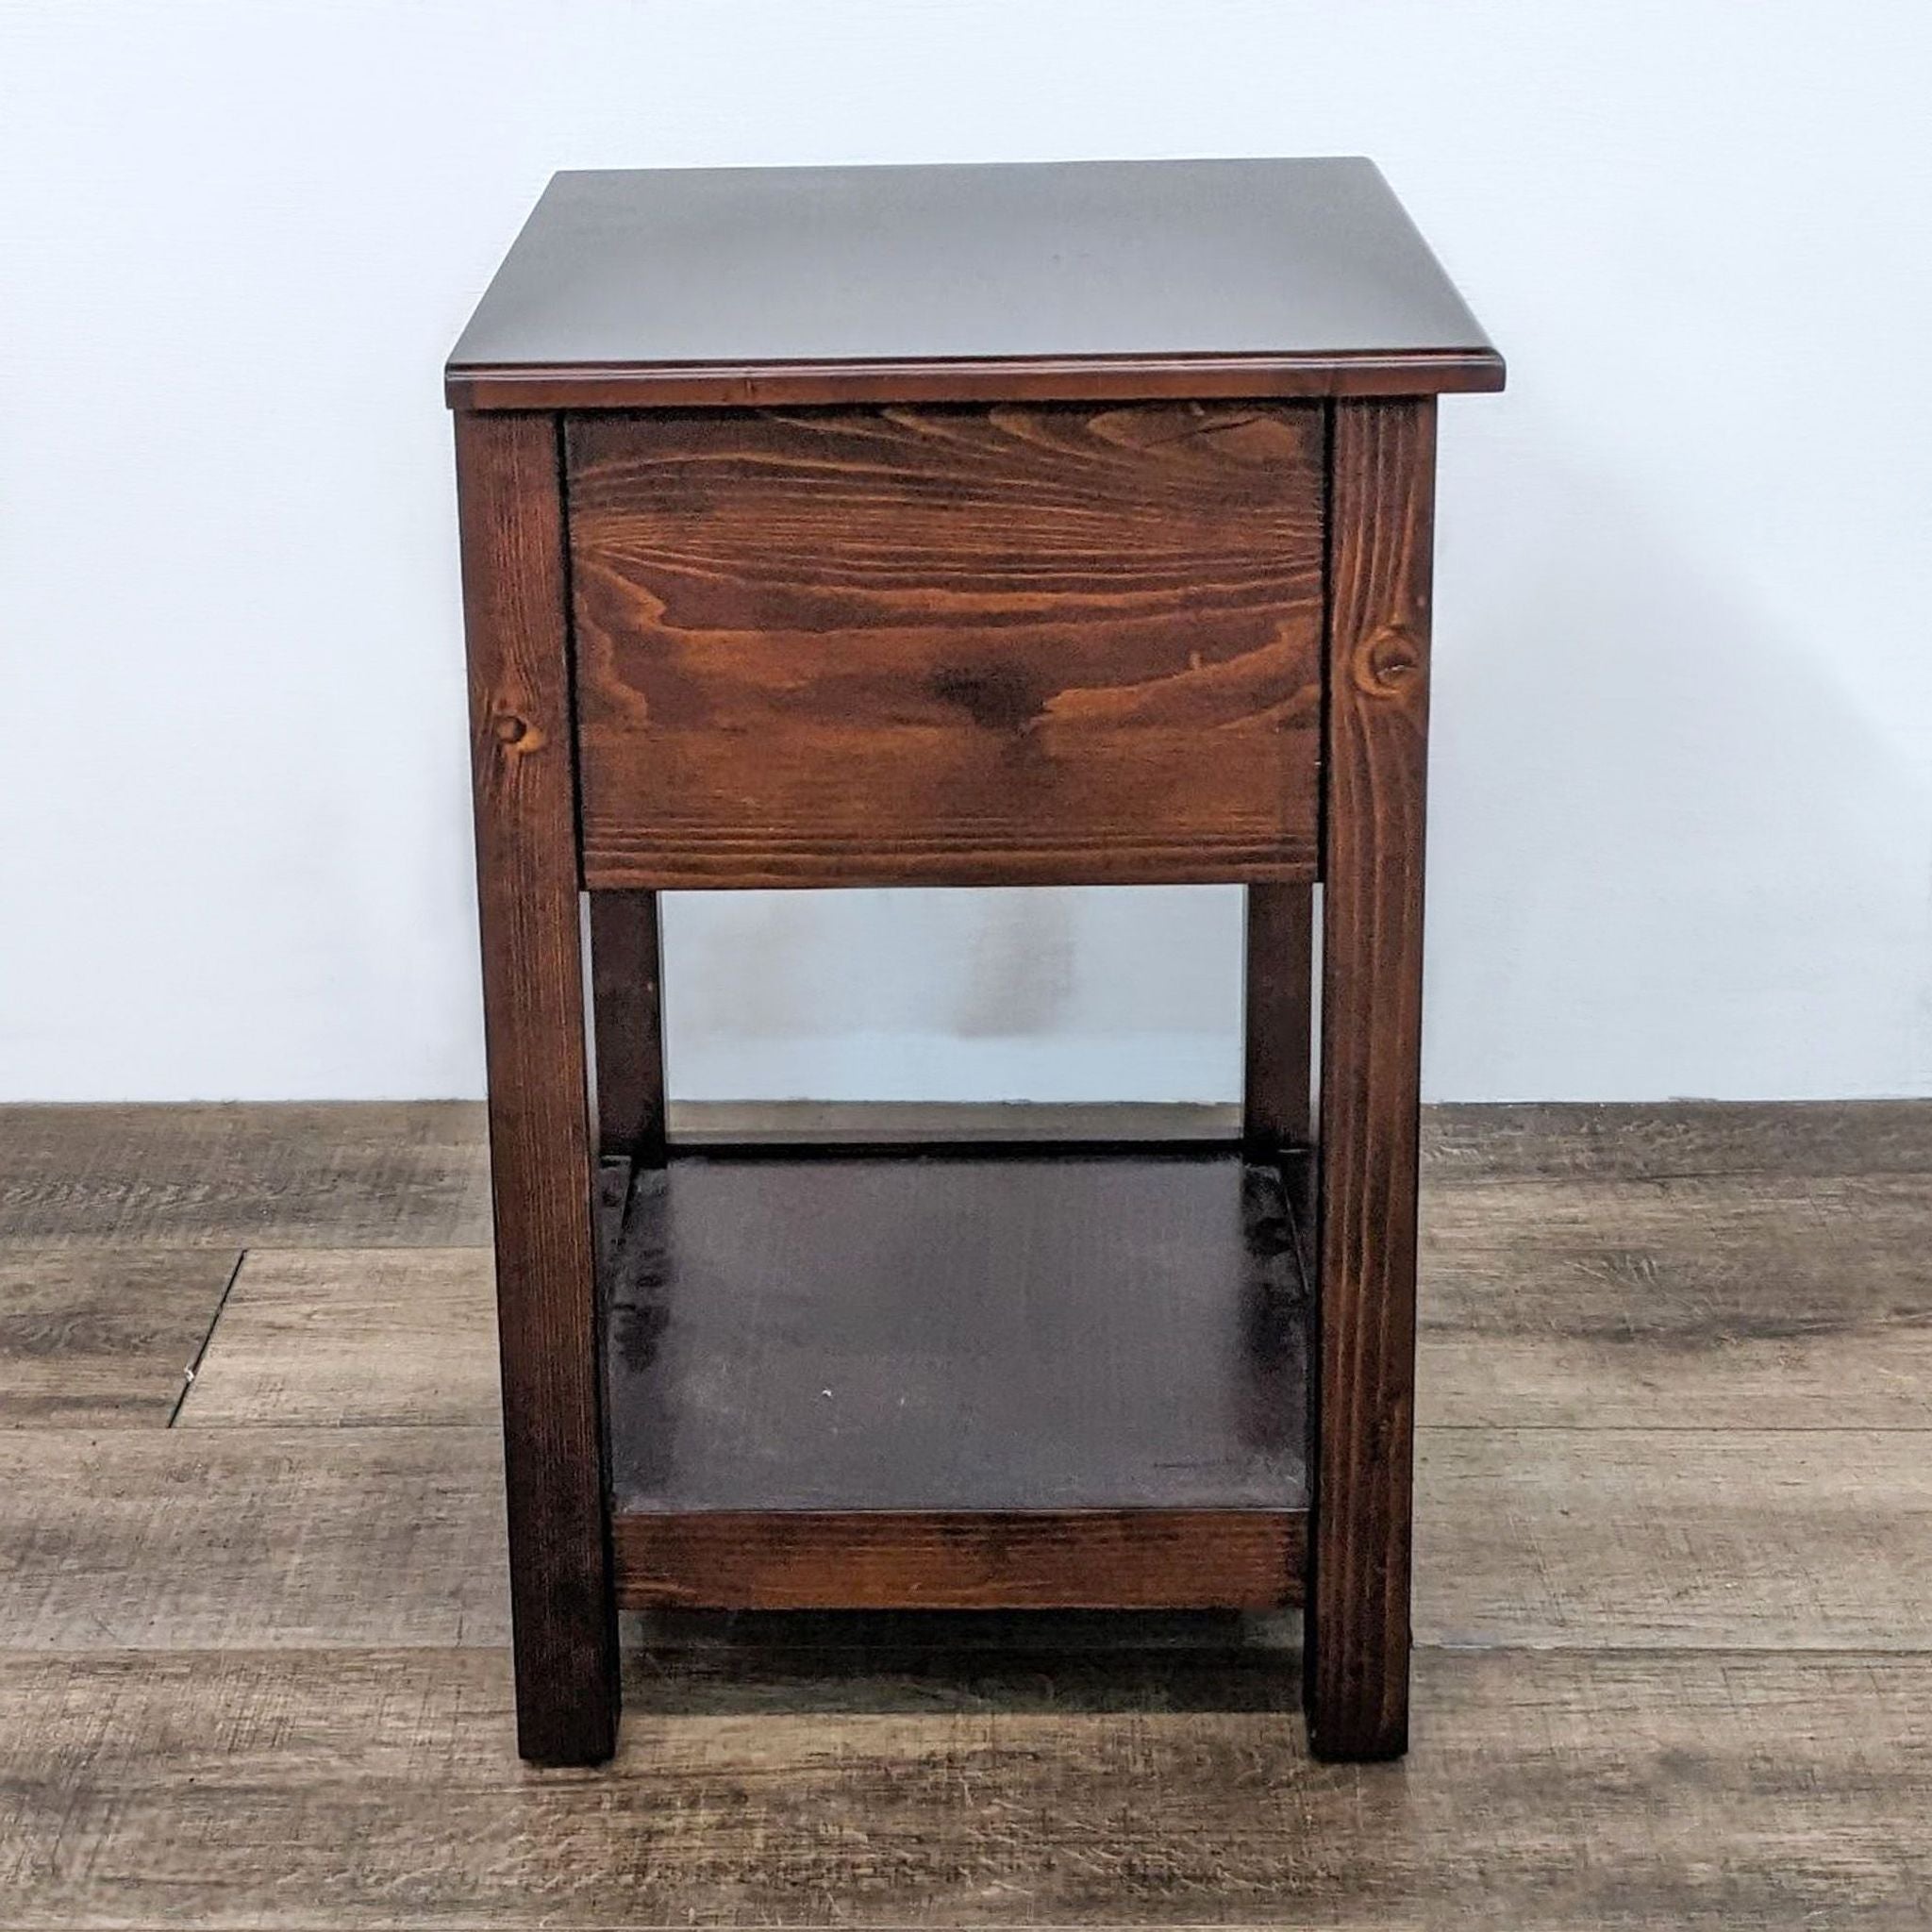 Brown Pottery Barn Kids end table featuring a single knobbed drawer, shown from an angled view to highlight its depth.